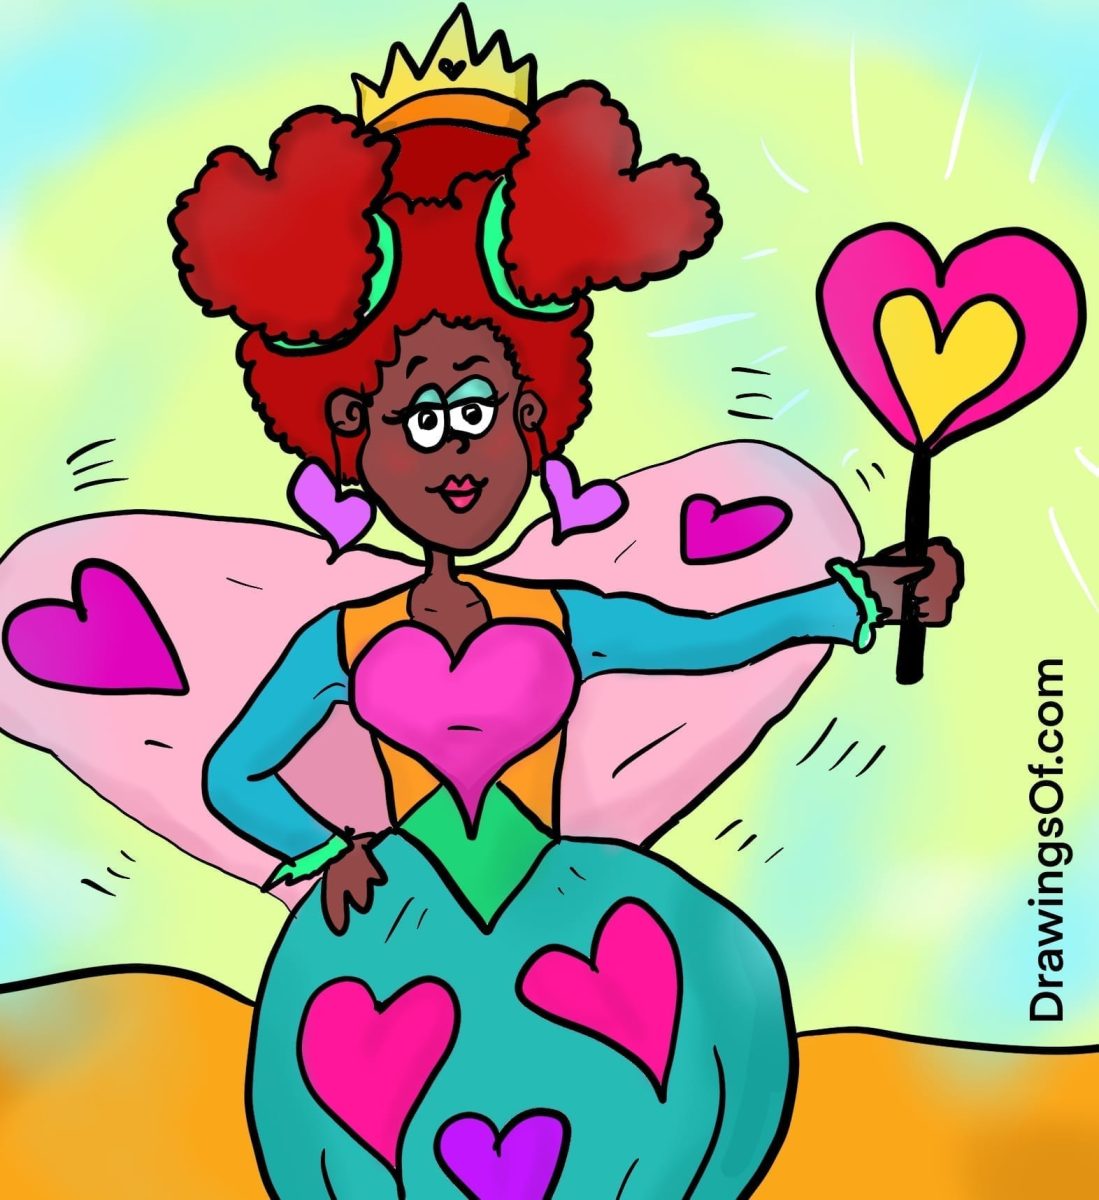 Queen of hearts drawing